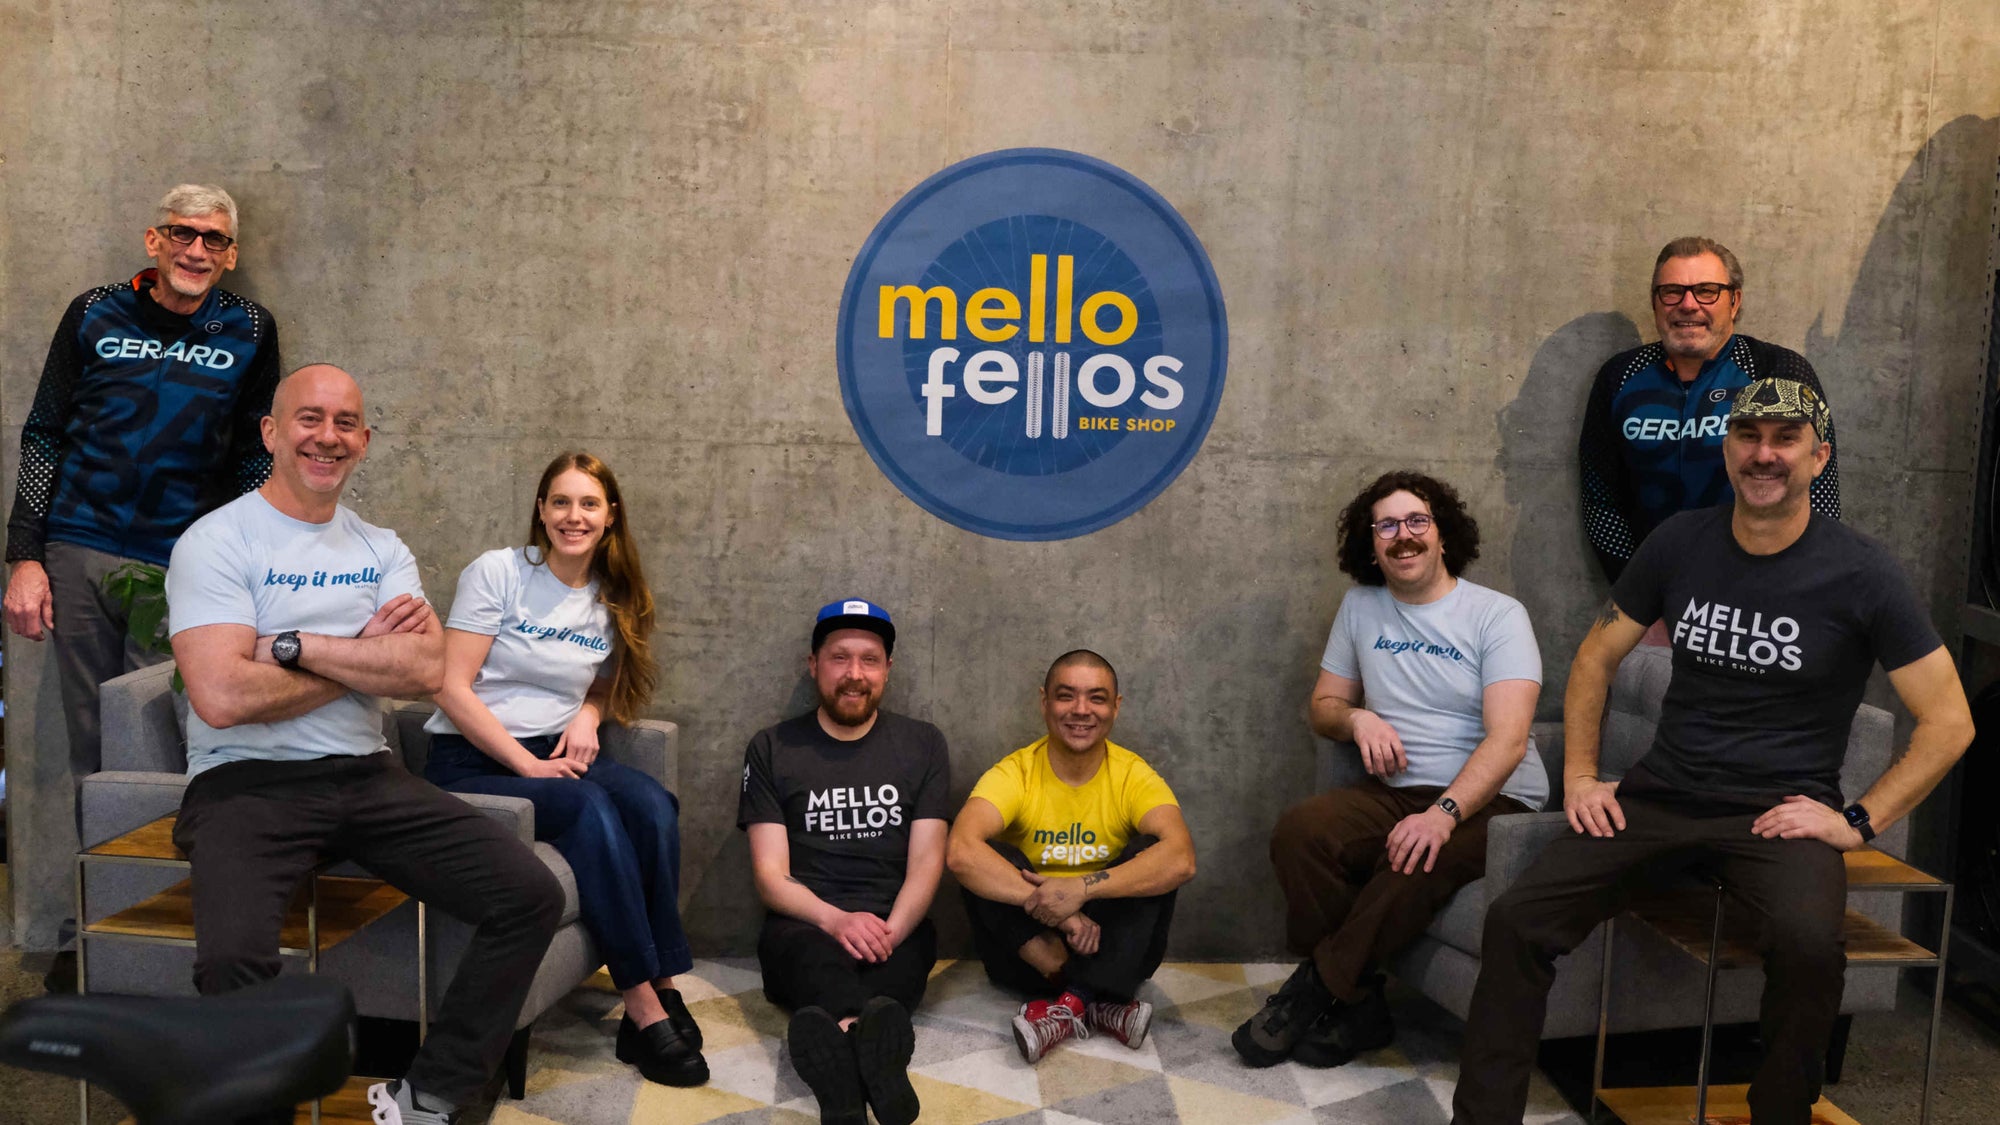 Mello Fellos 2151 6th ave Seattle Gerard Cycles 1st authorized dealer in Seattle